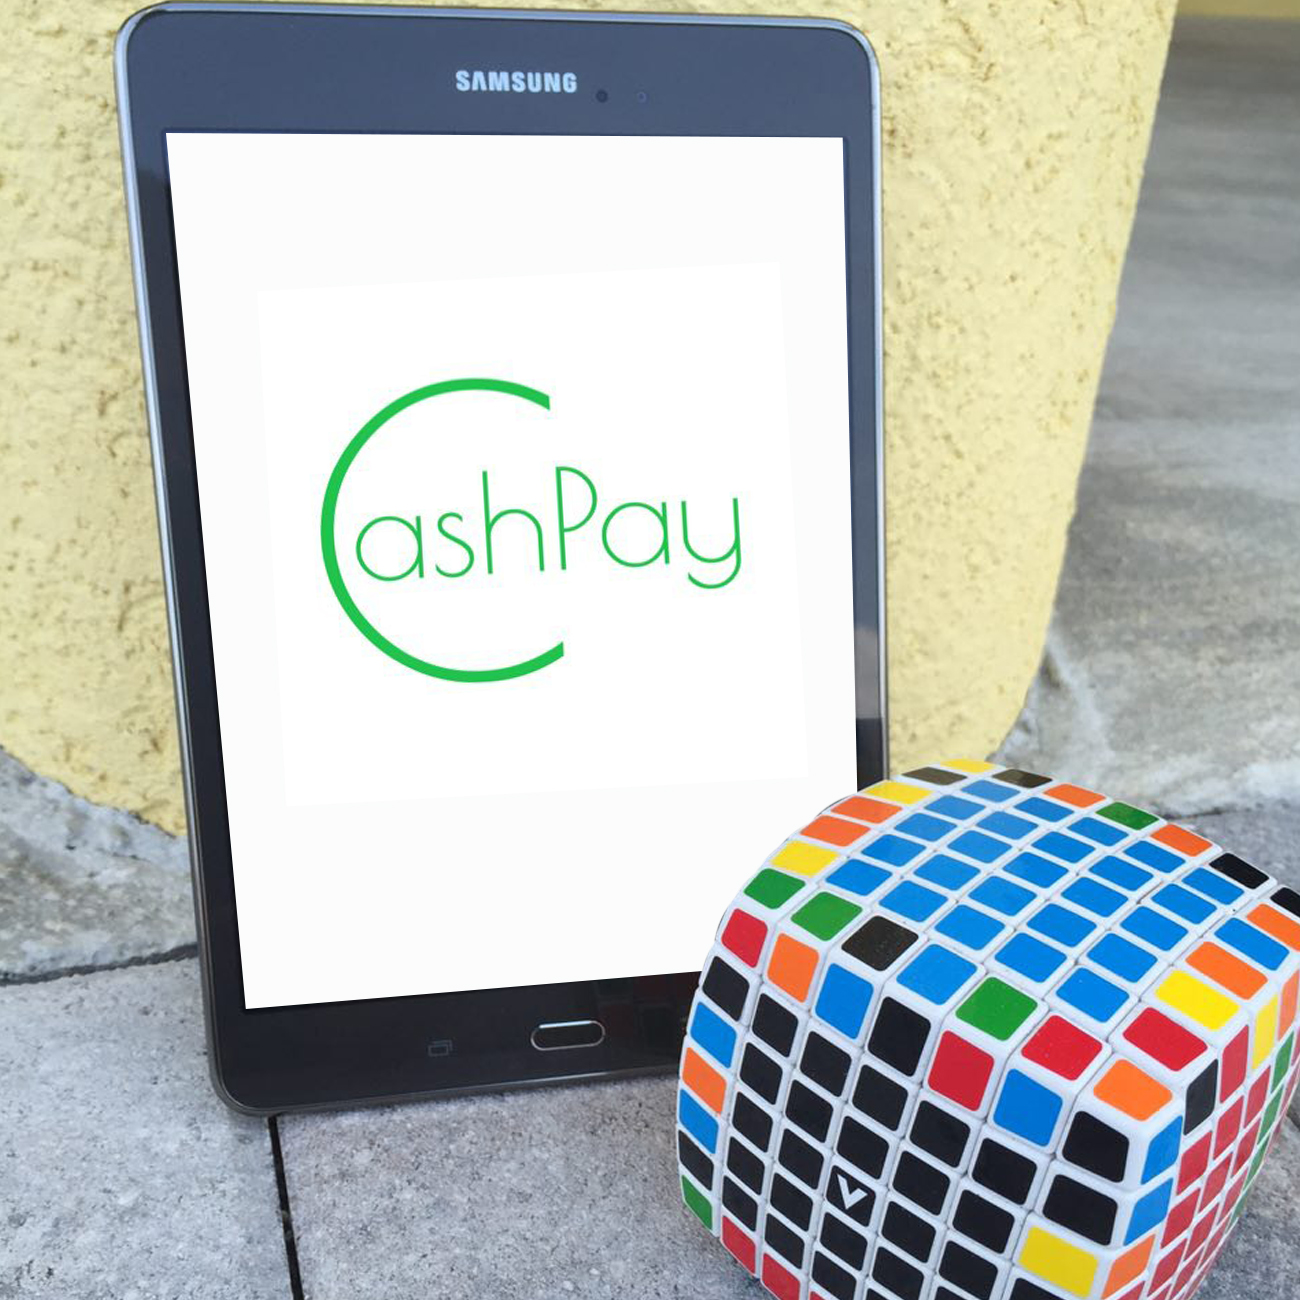 New Cashpay Wallet Allows Purchases With Any Online Retailer Using BCH